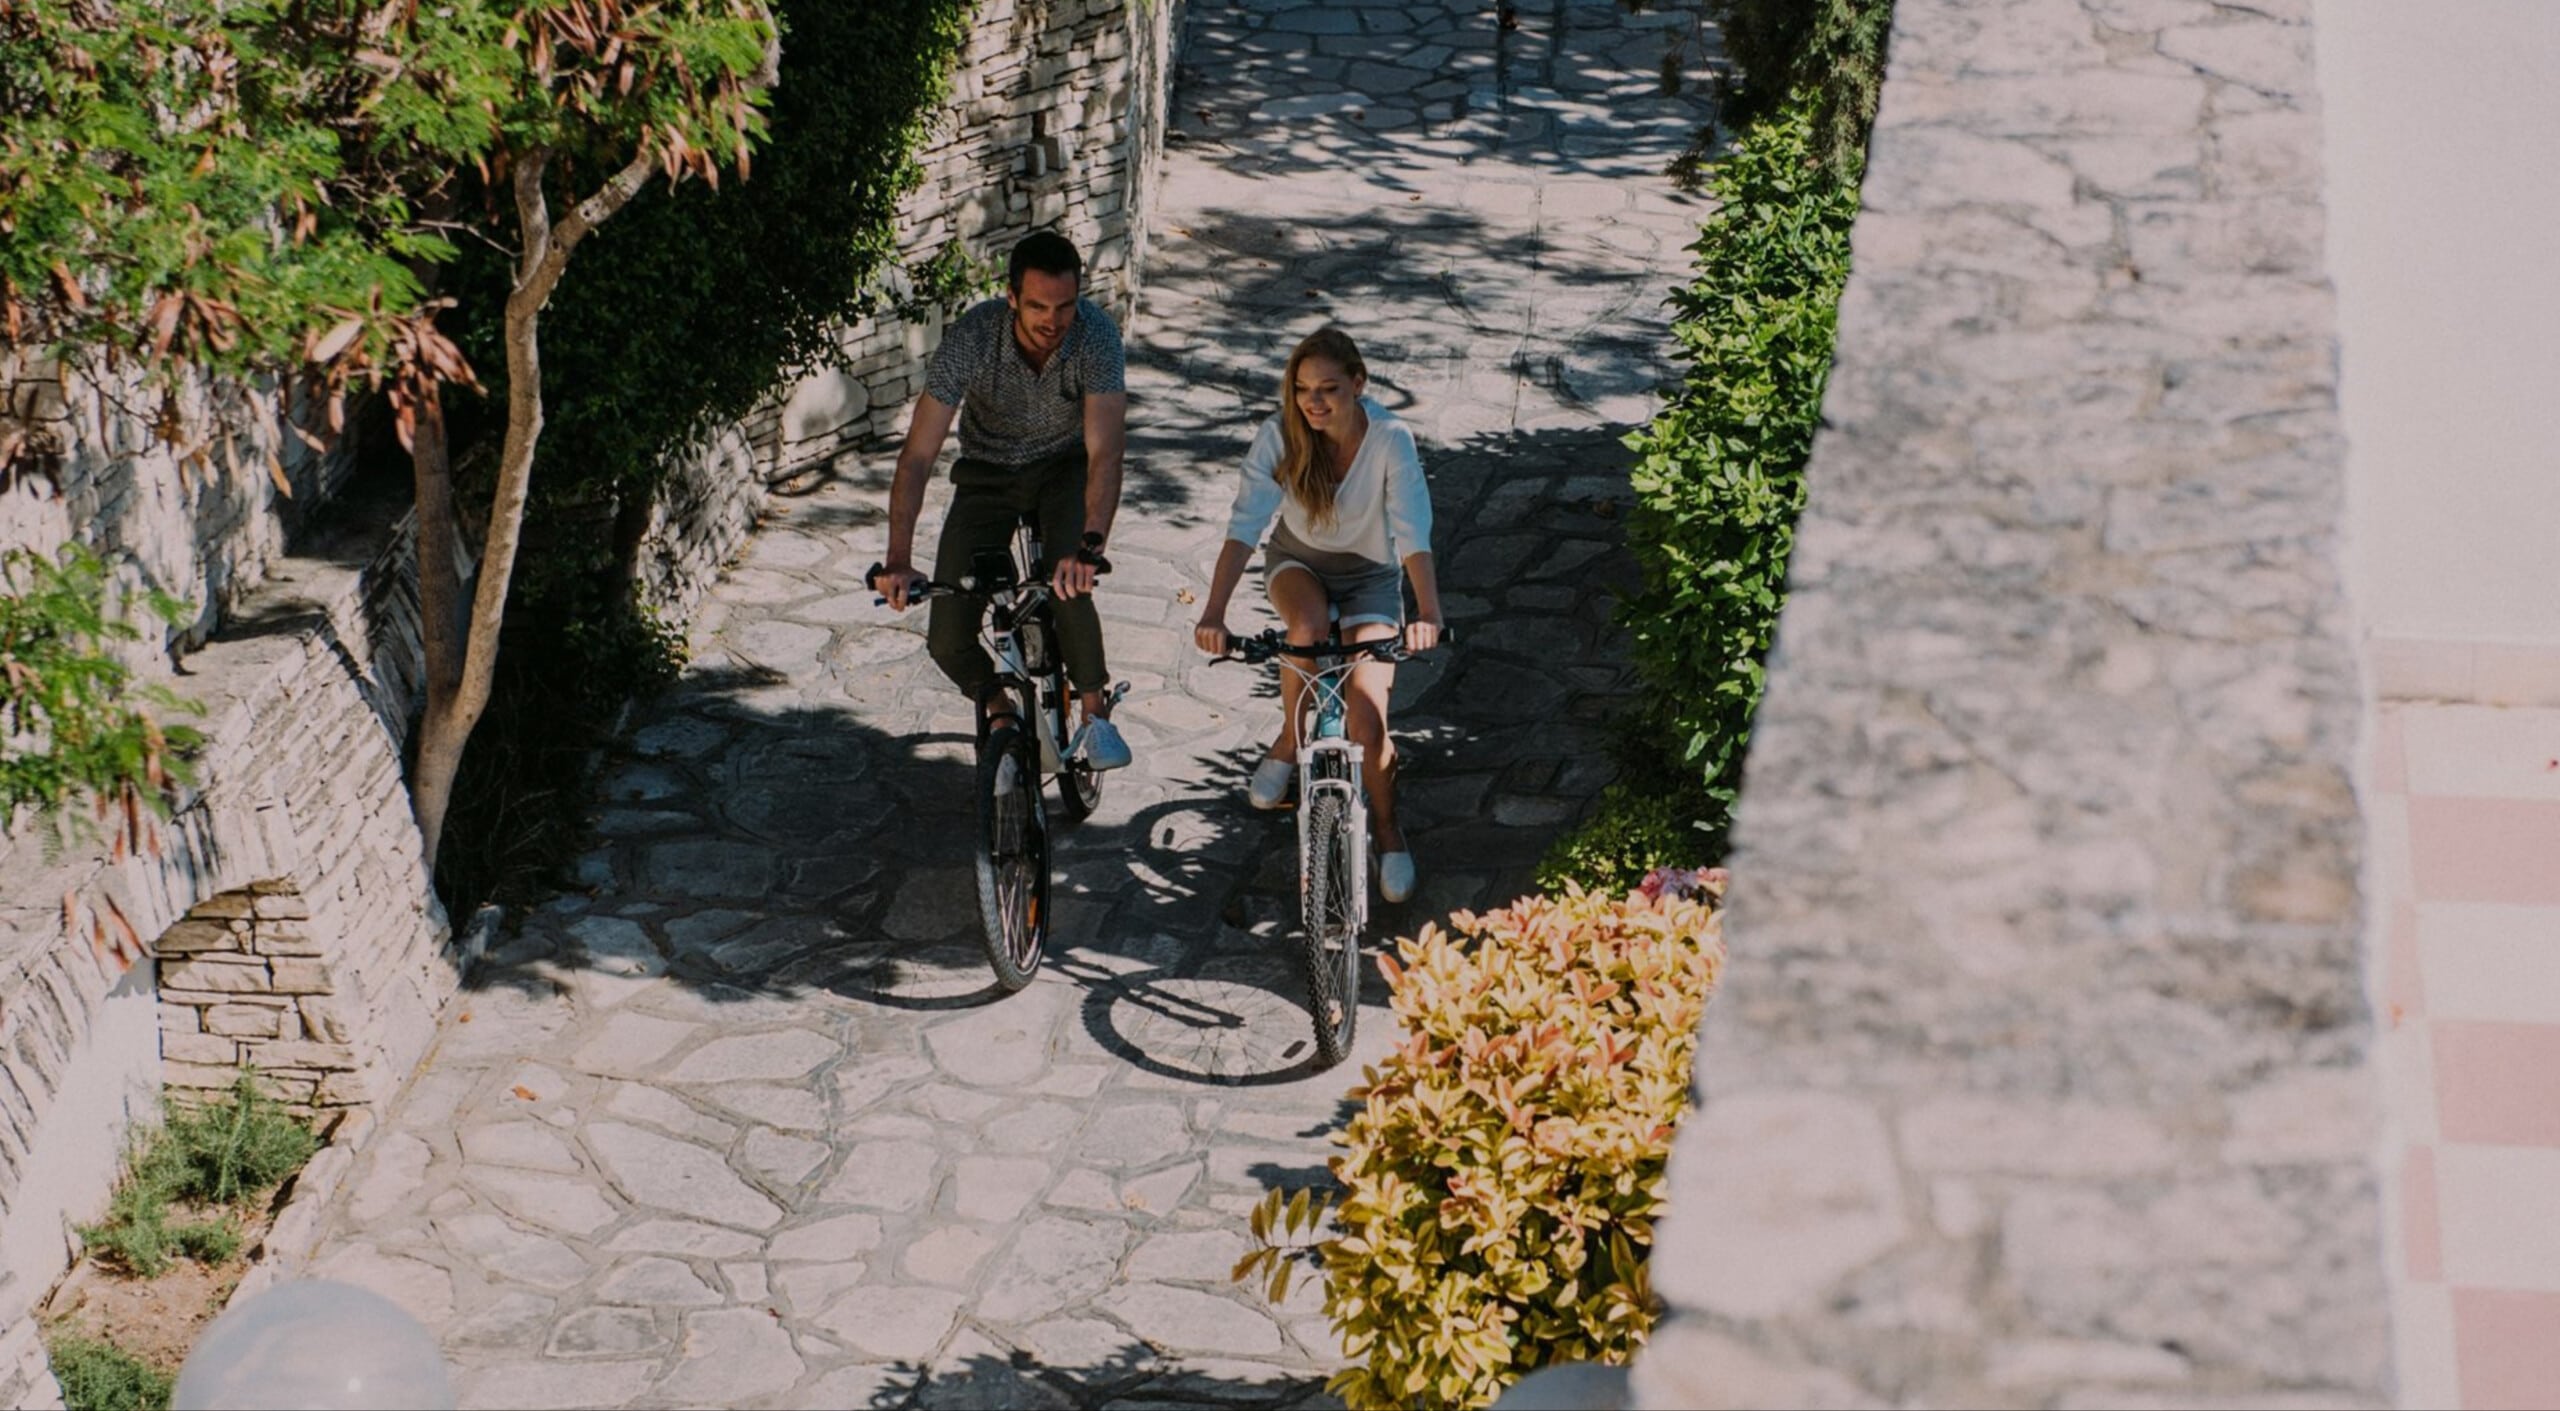 At our bike friendly hotels in Samos, we promote cycling as the most environmental way of getting around